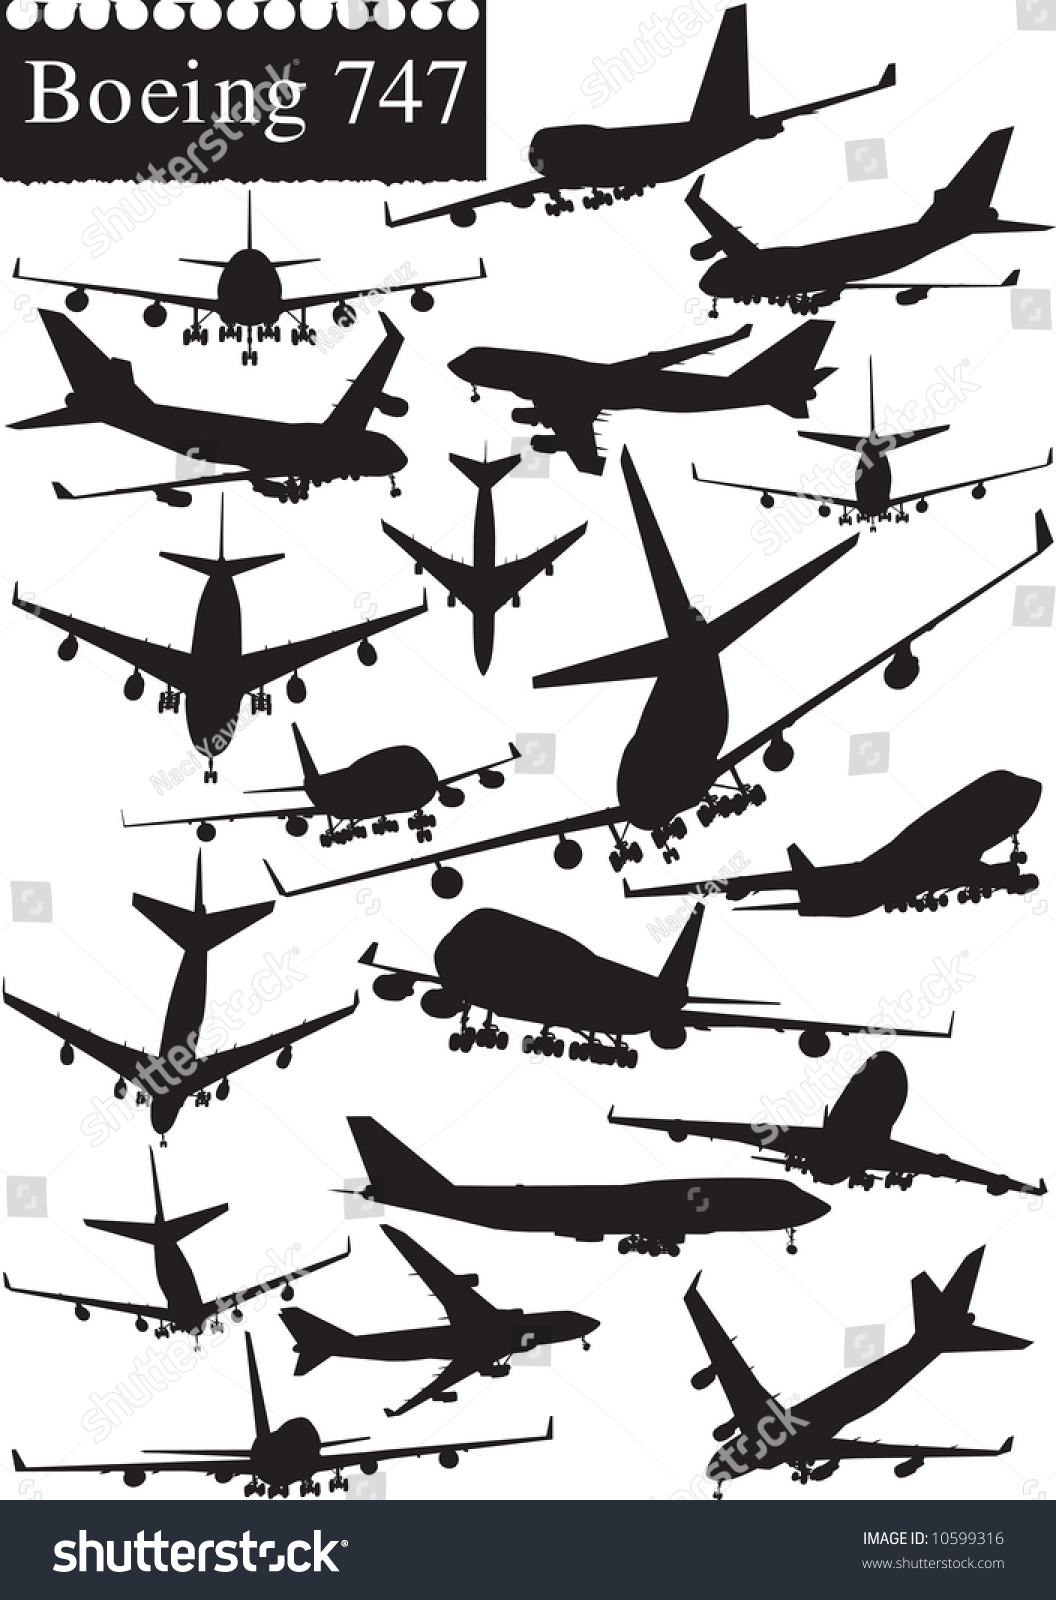 SVG of Boeing 747 airplane silhouettes svg